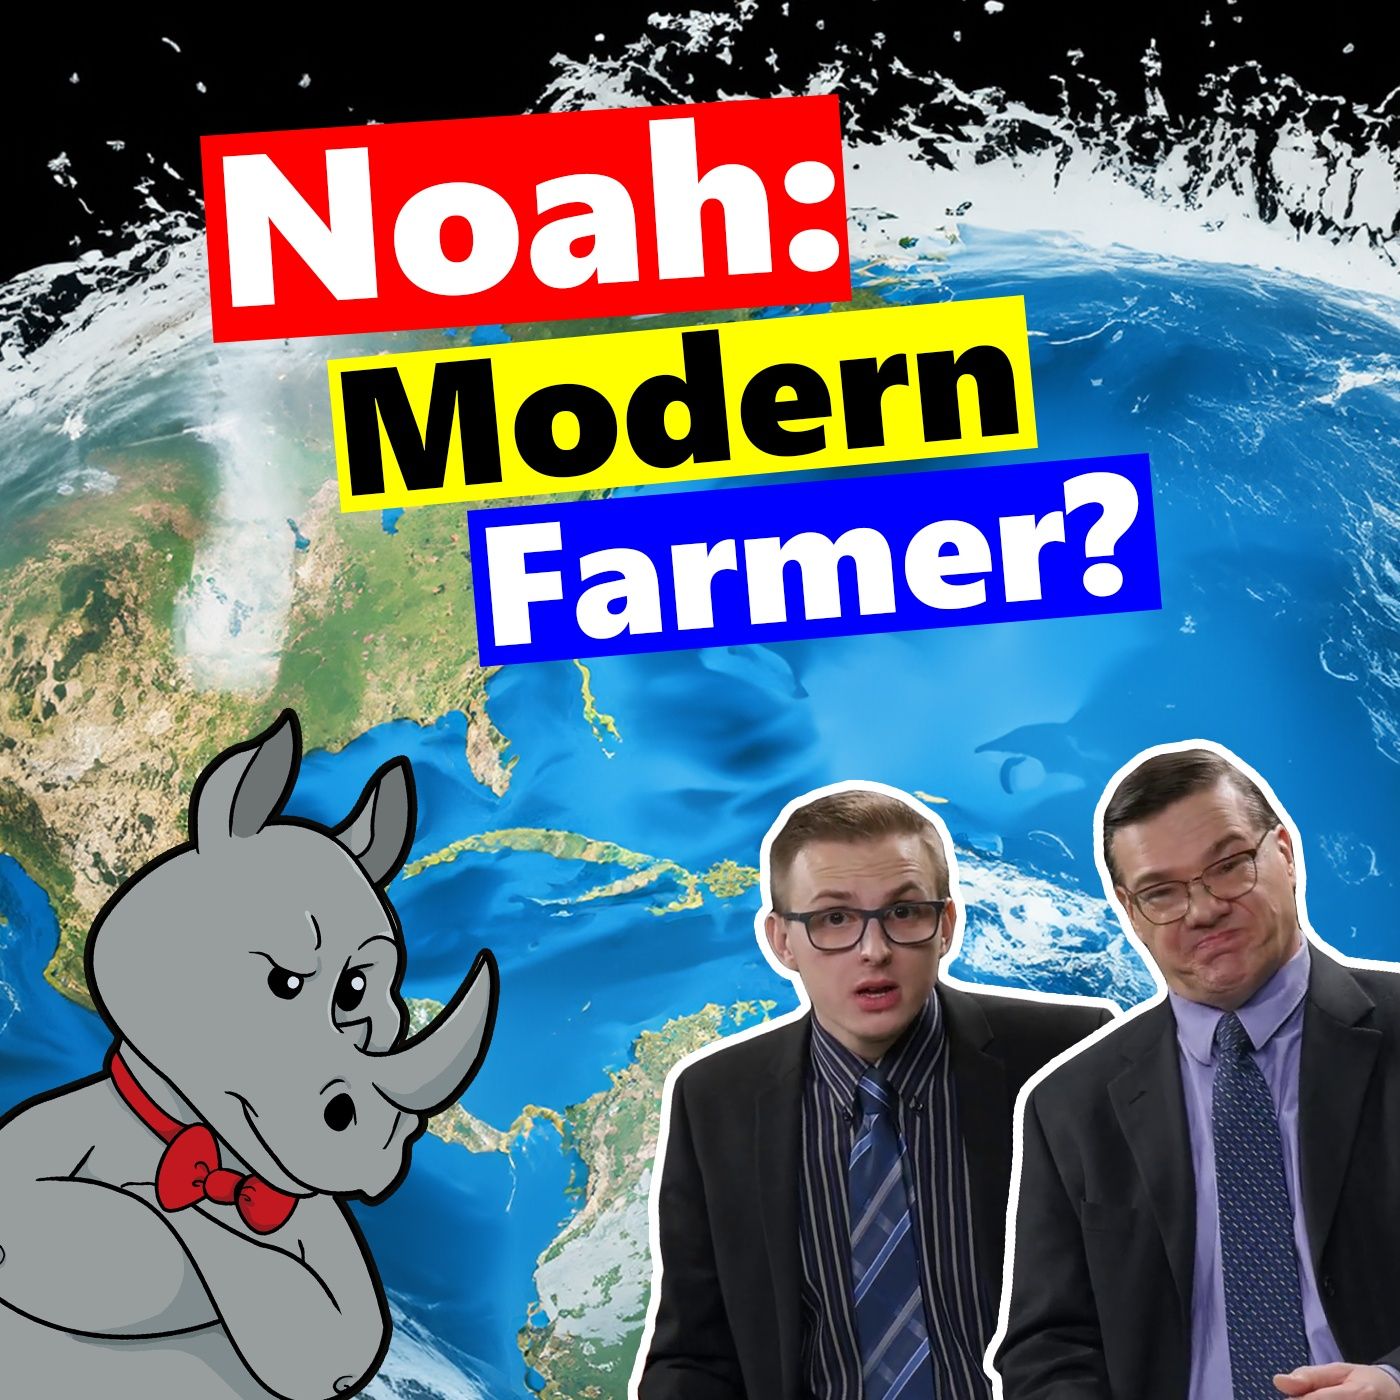 Noah Was The Most Efficient Farmer in History!